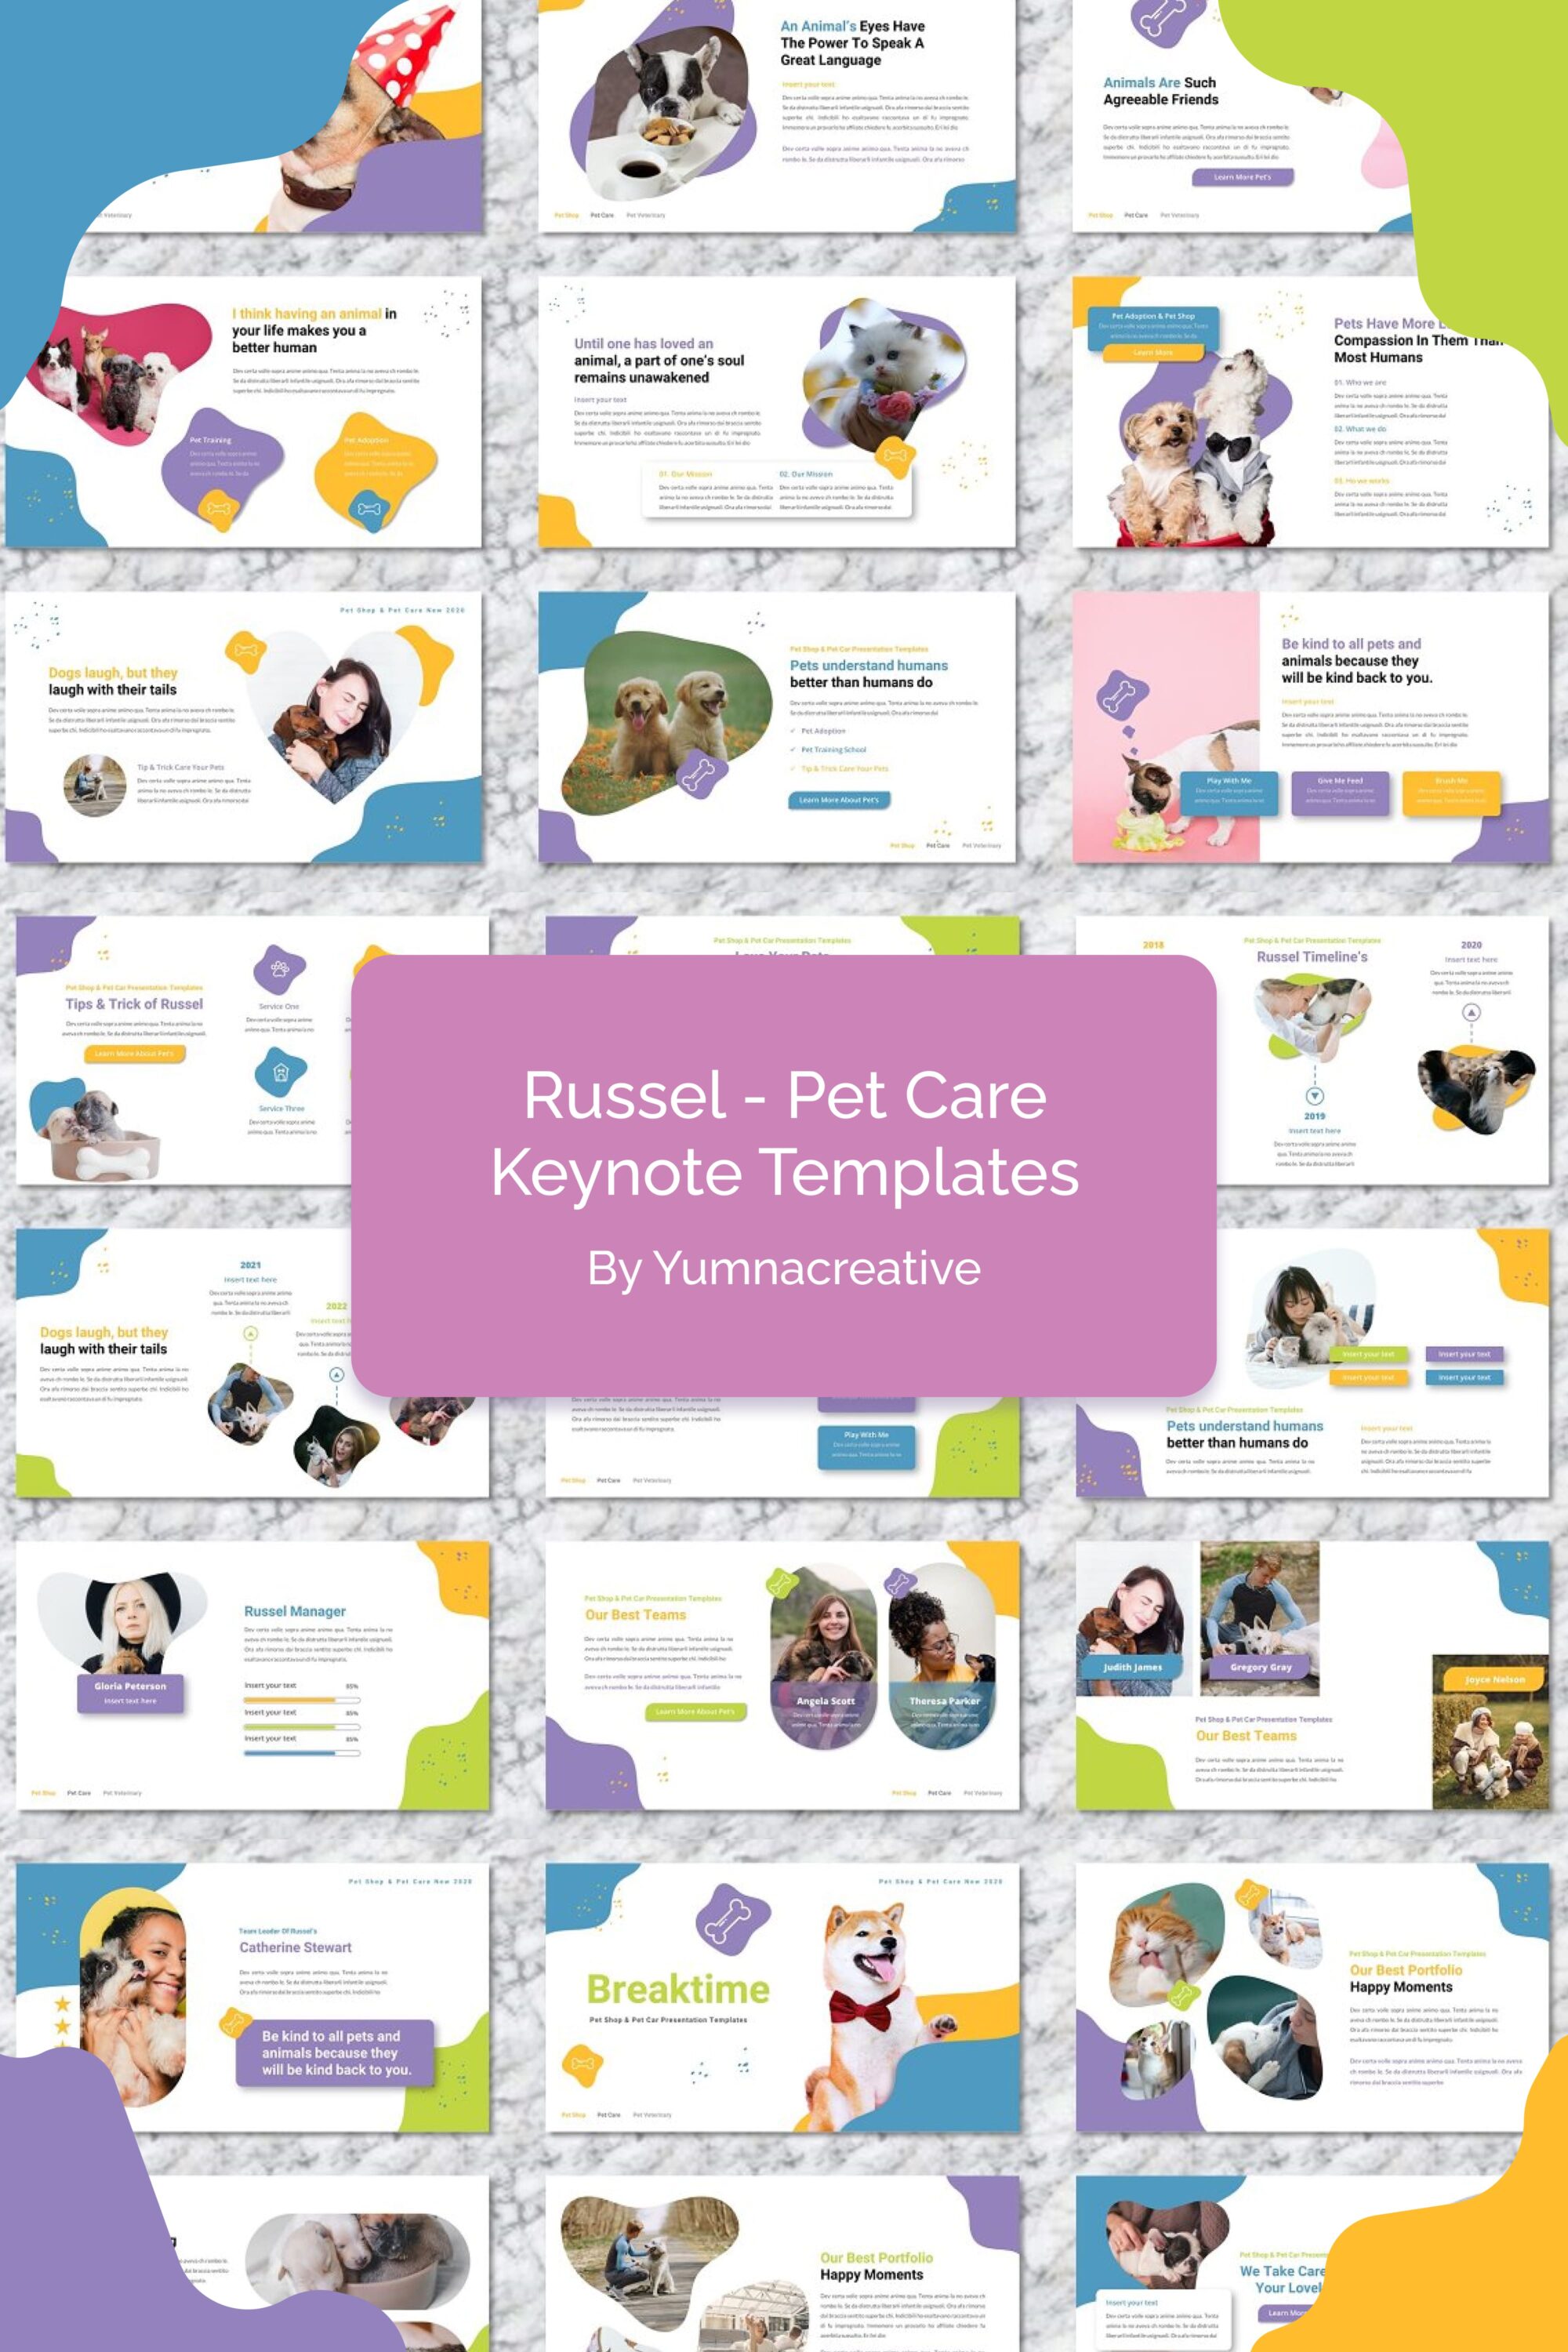 Russel pet care keynote templates - pinterest image preview.